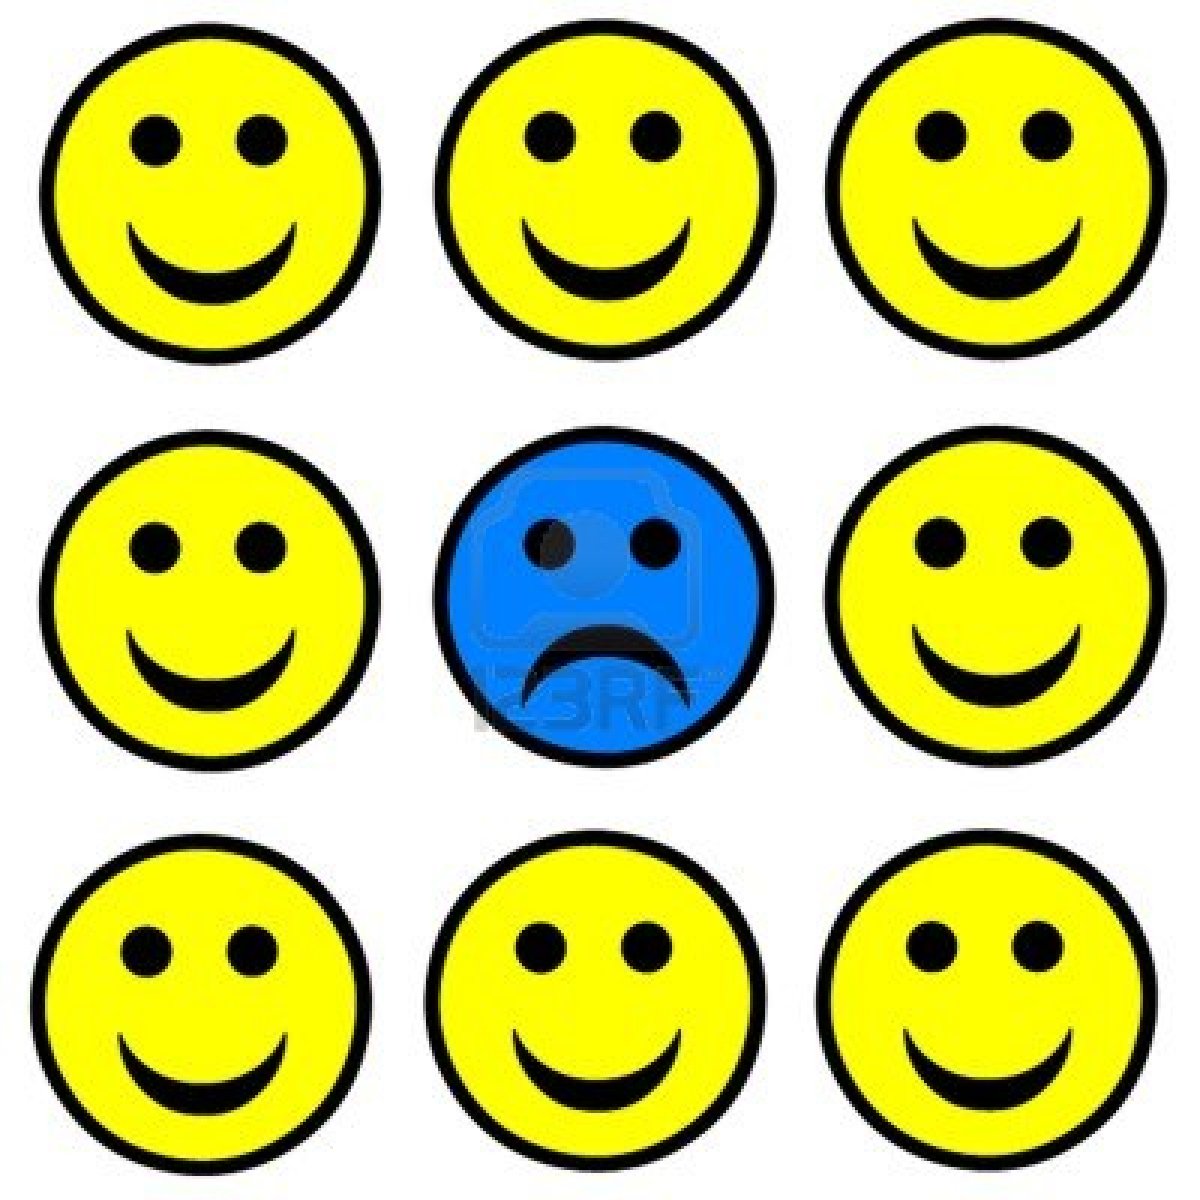 15920736-sad-smiley-standing-out-in-a-crowd-of-happy-smileys.jpg